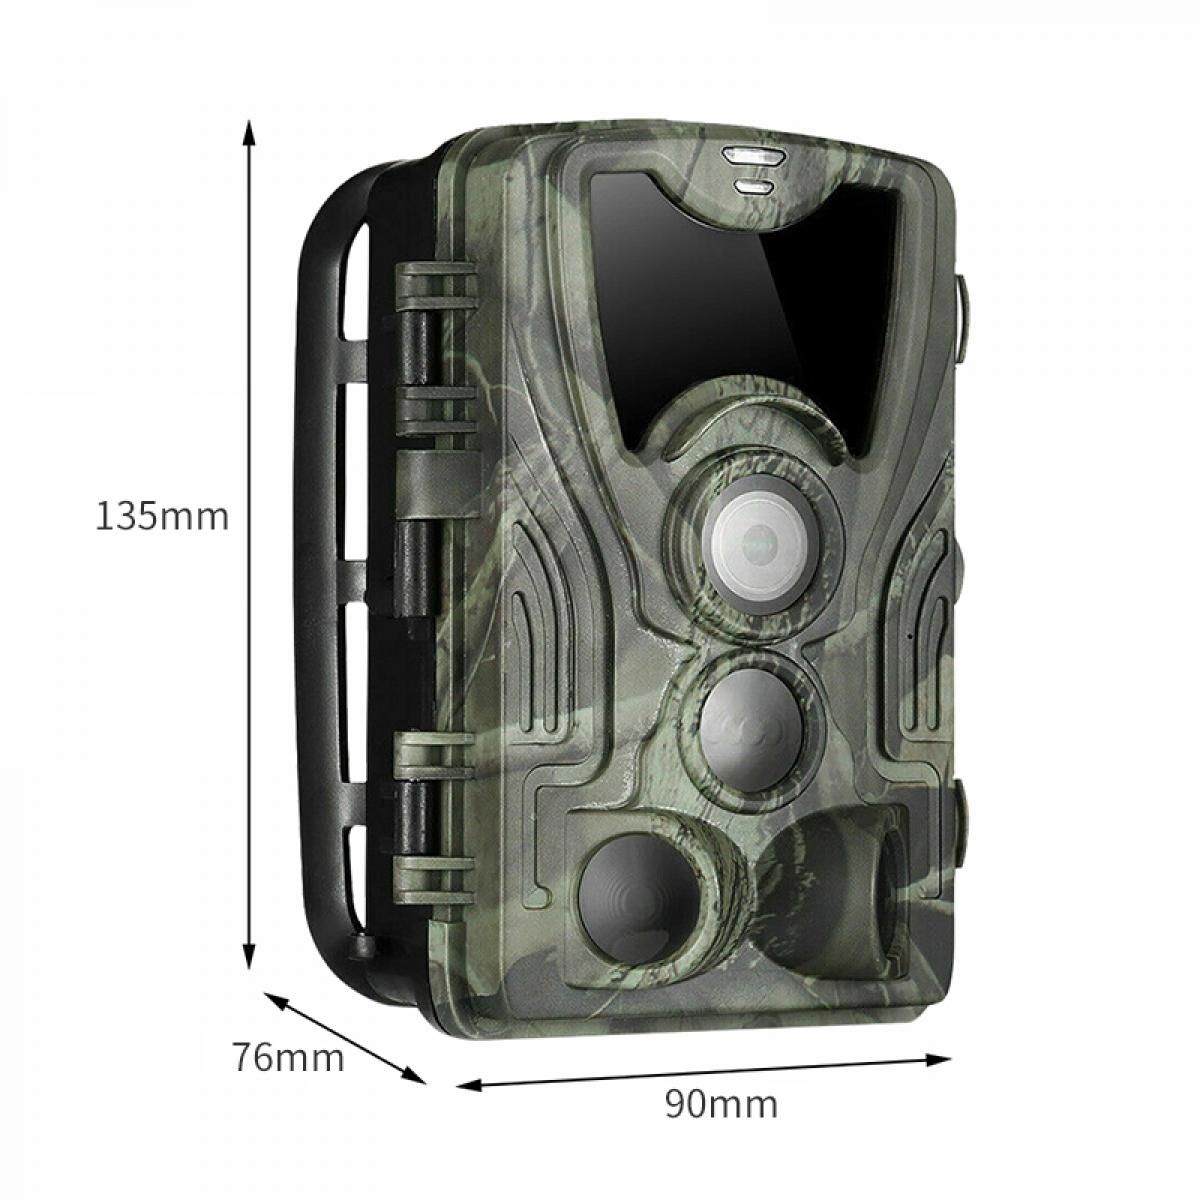 K&F Concept Trail Game Camera 4K WiFi 30MP with 940nm Infrared Outdoor IP65 Waterproof Hunting Infrared Night Vision Camera (KF35.019)